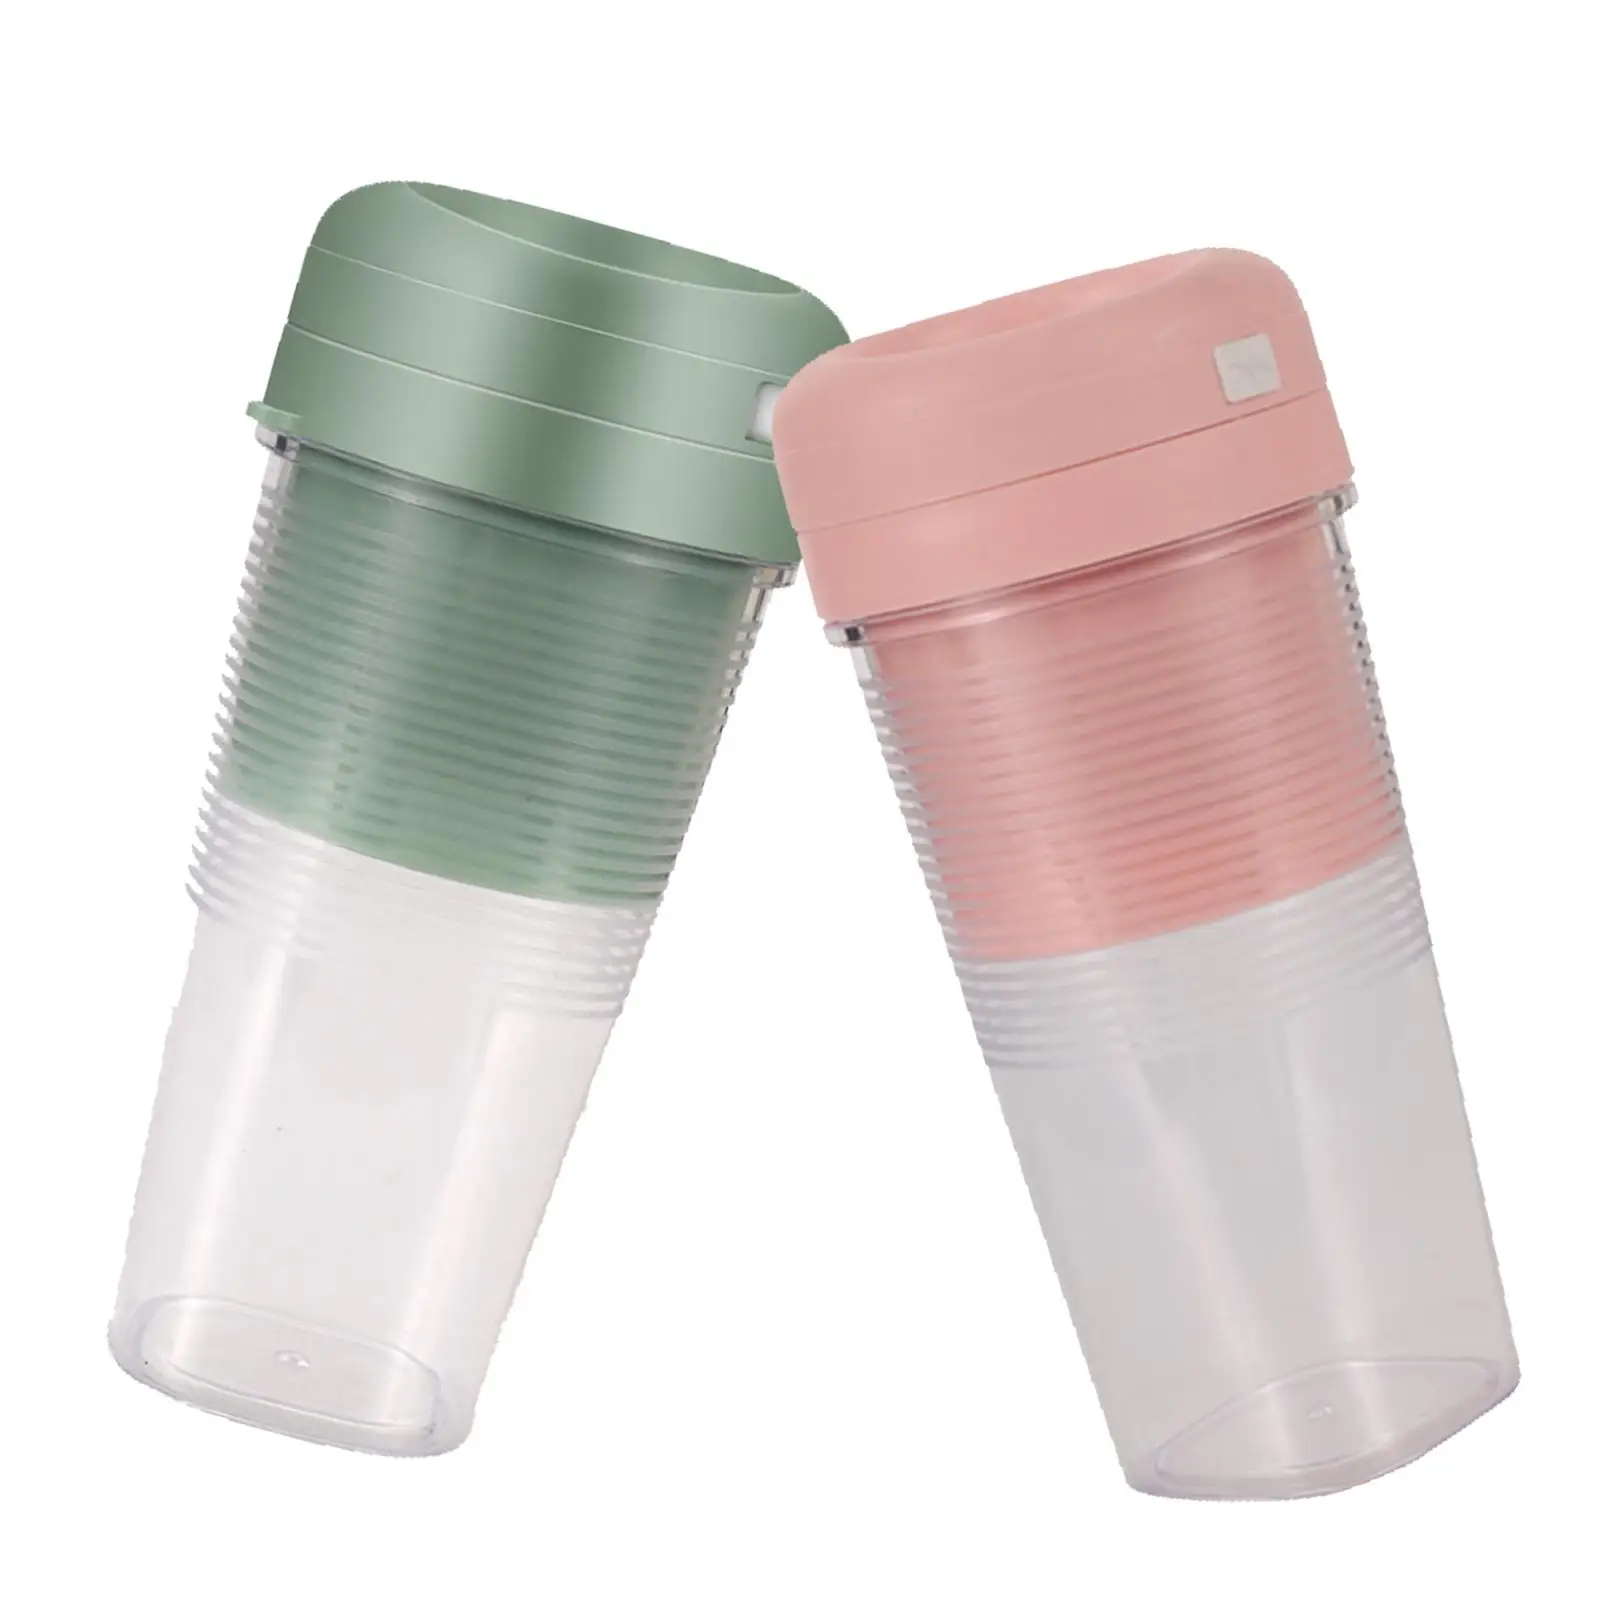 Mini Juicer for Shakes and Smoothies Personal Size Home Jucie Fruit Blender Multifunction Juice Mixing Cup for Outdoor Travel